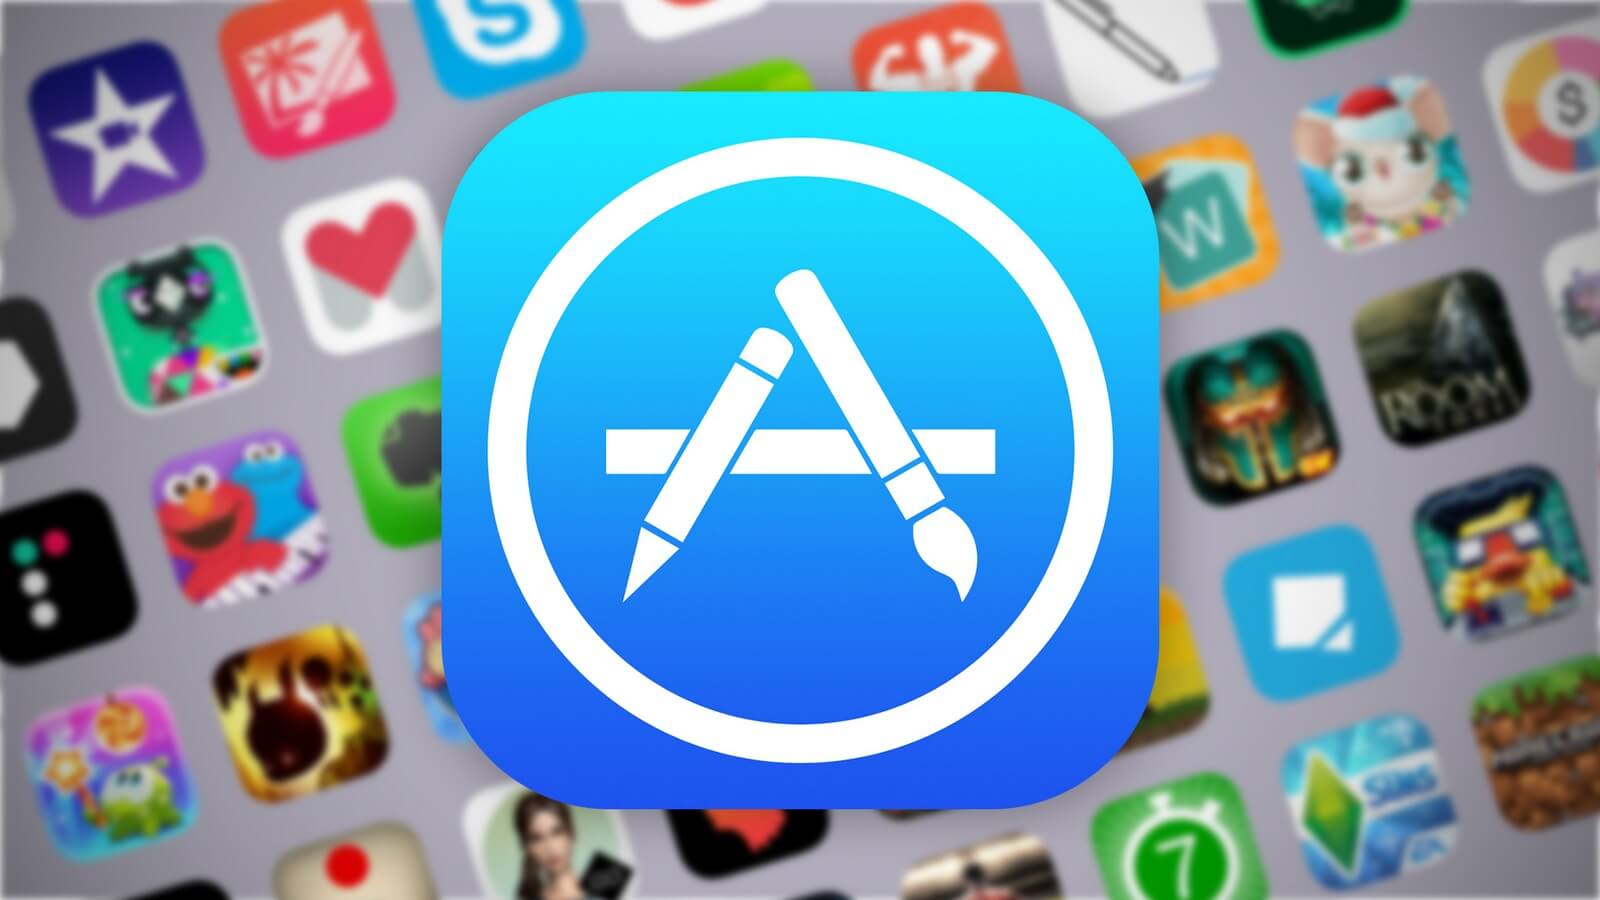 The App Store was responsible for half a trillion dollars in sales last year